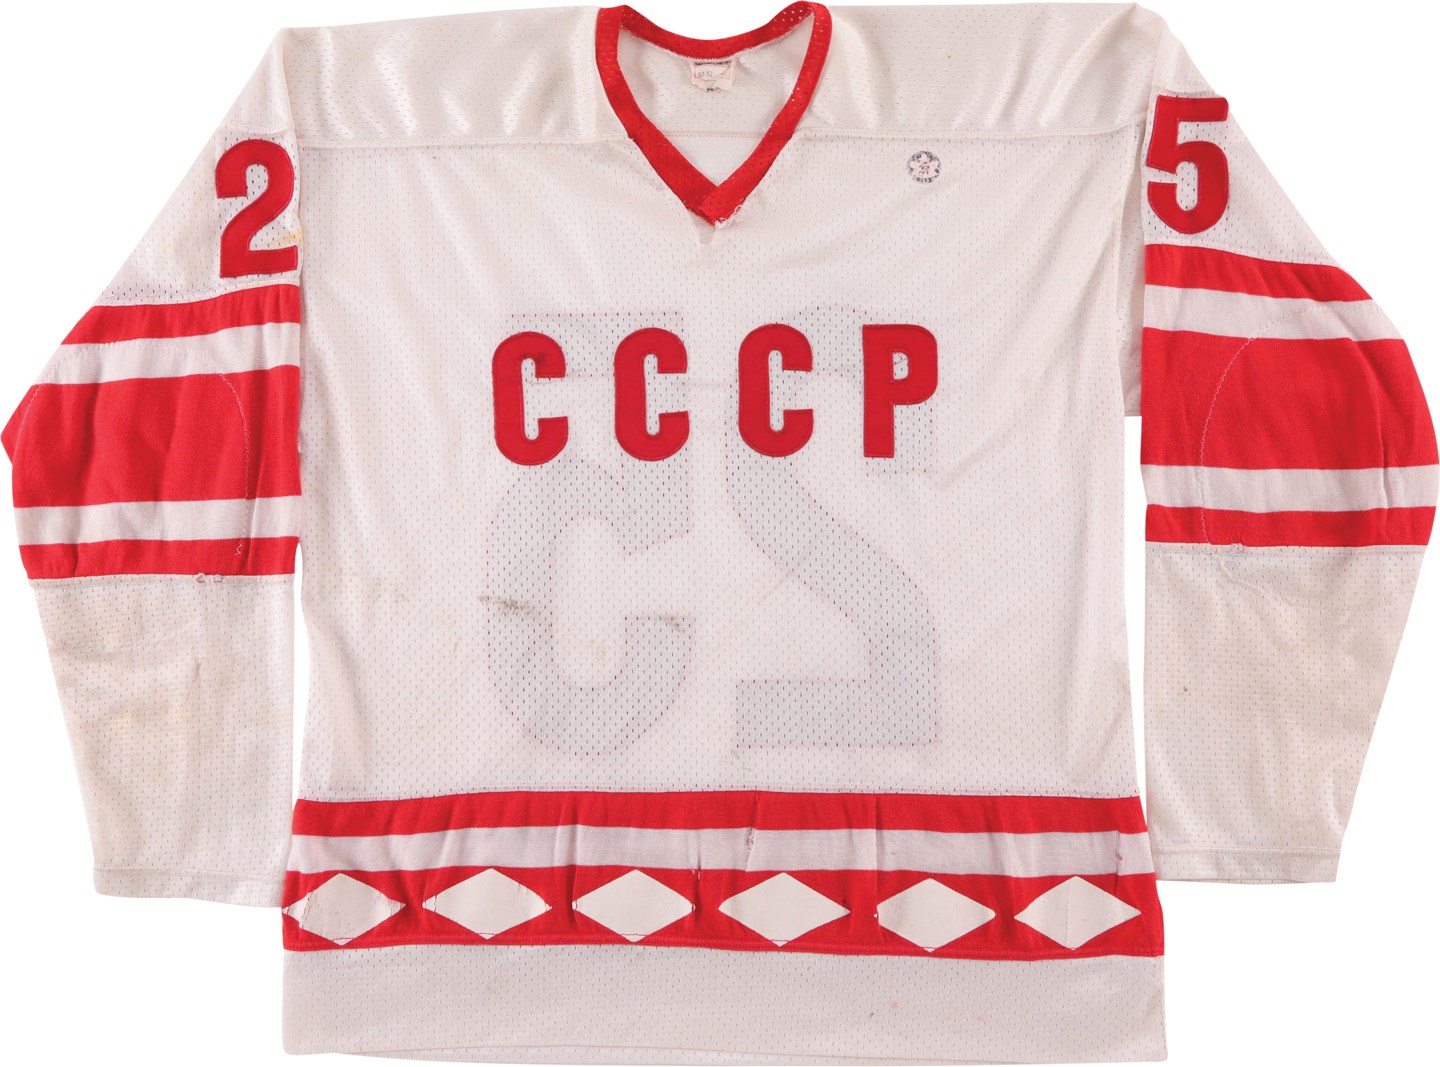 Hockey - Early 1980s Russian National "CCCP" Game Worn Jersey